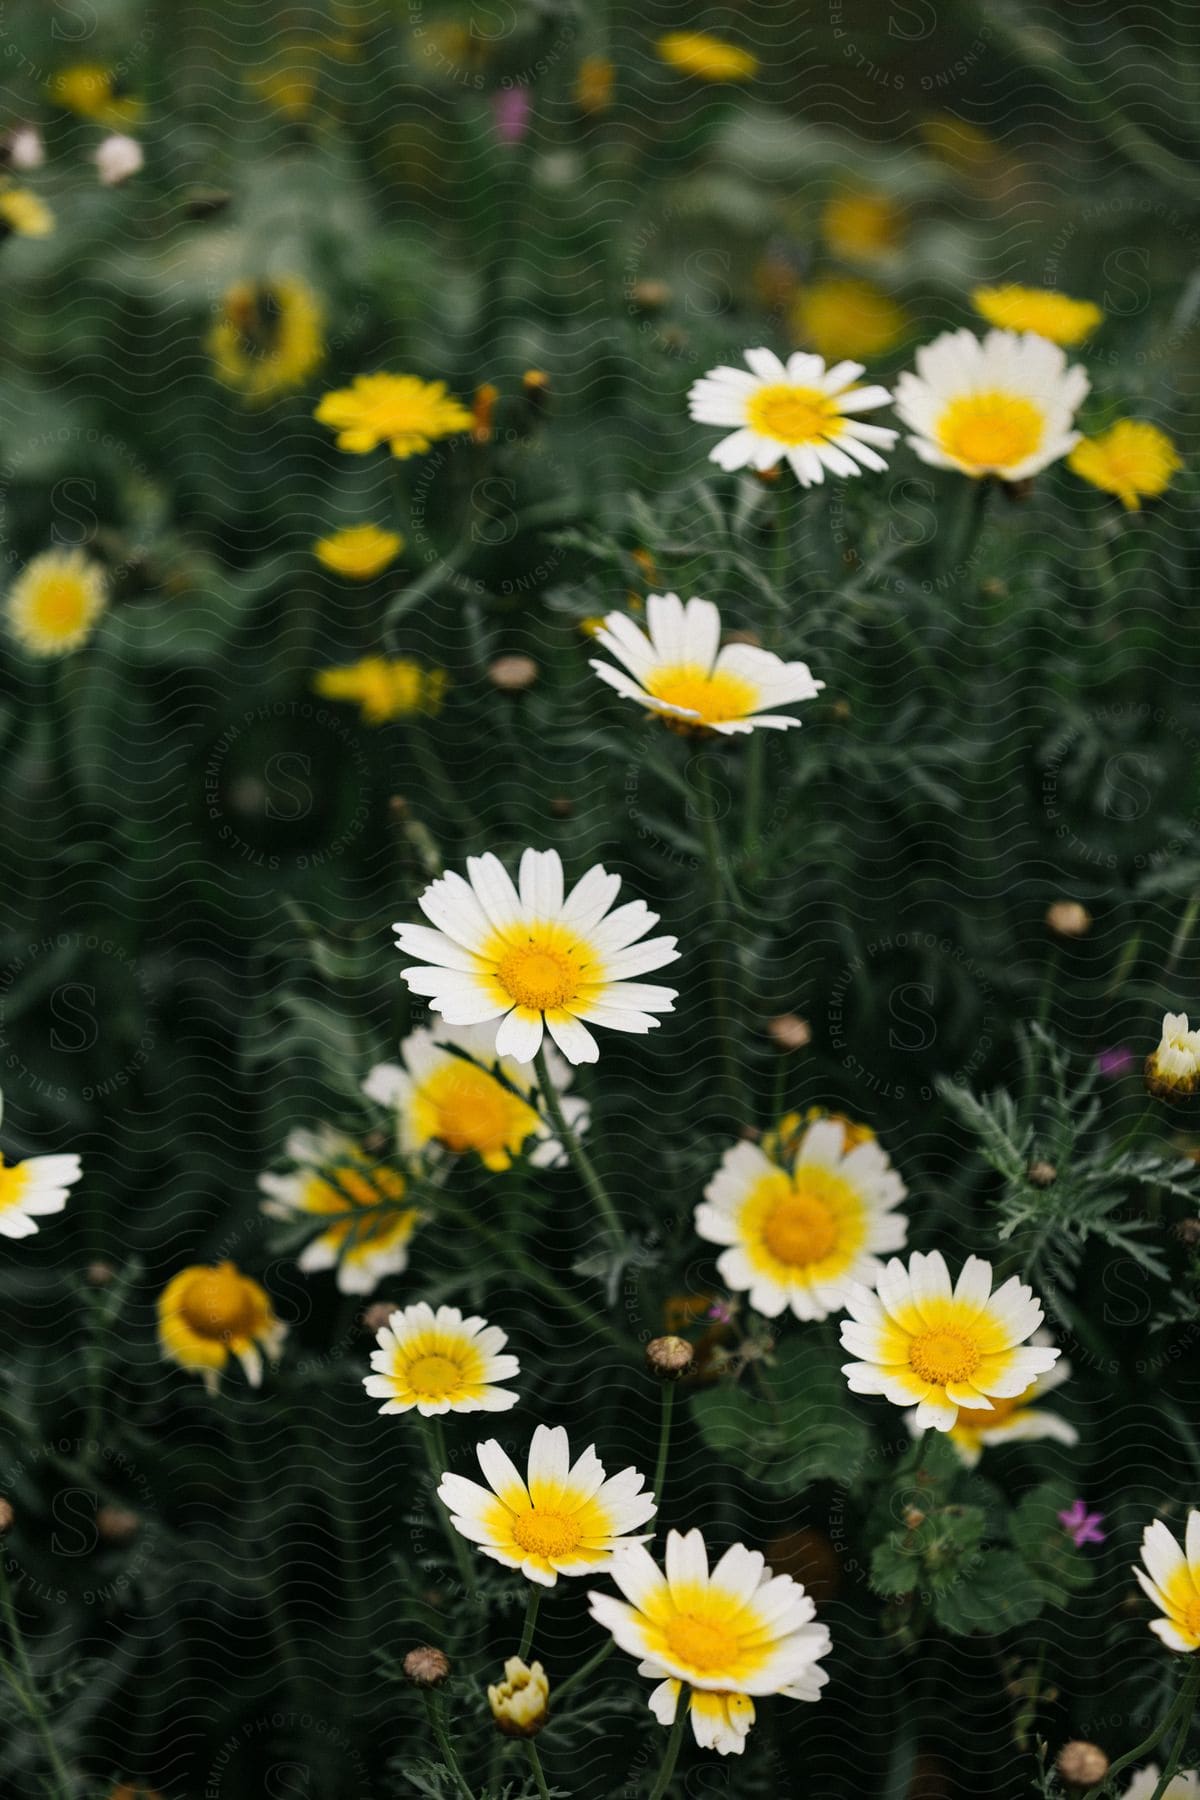 Yellow daisylike flower surrounded by green grass and leaves